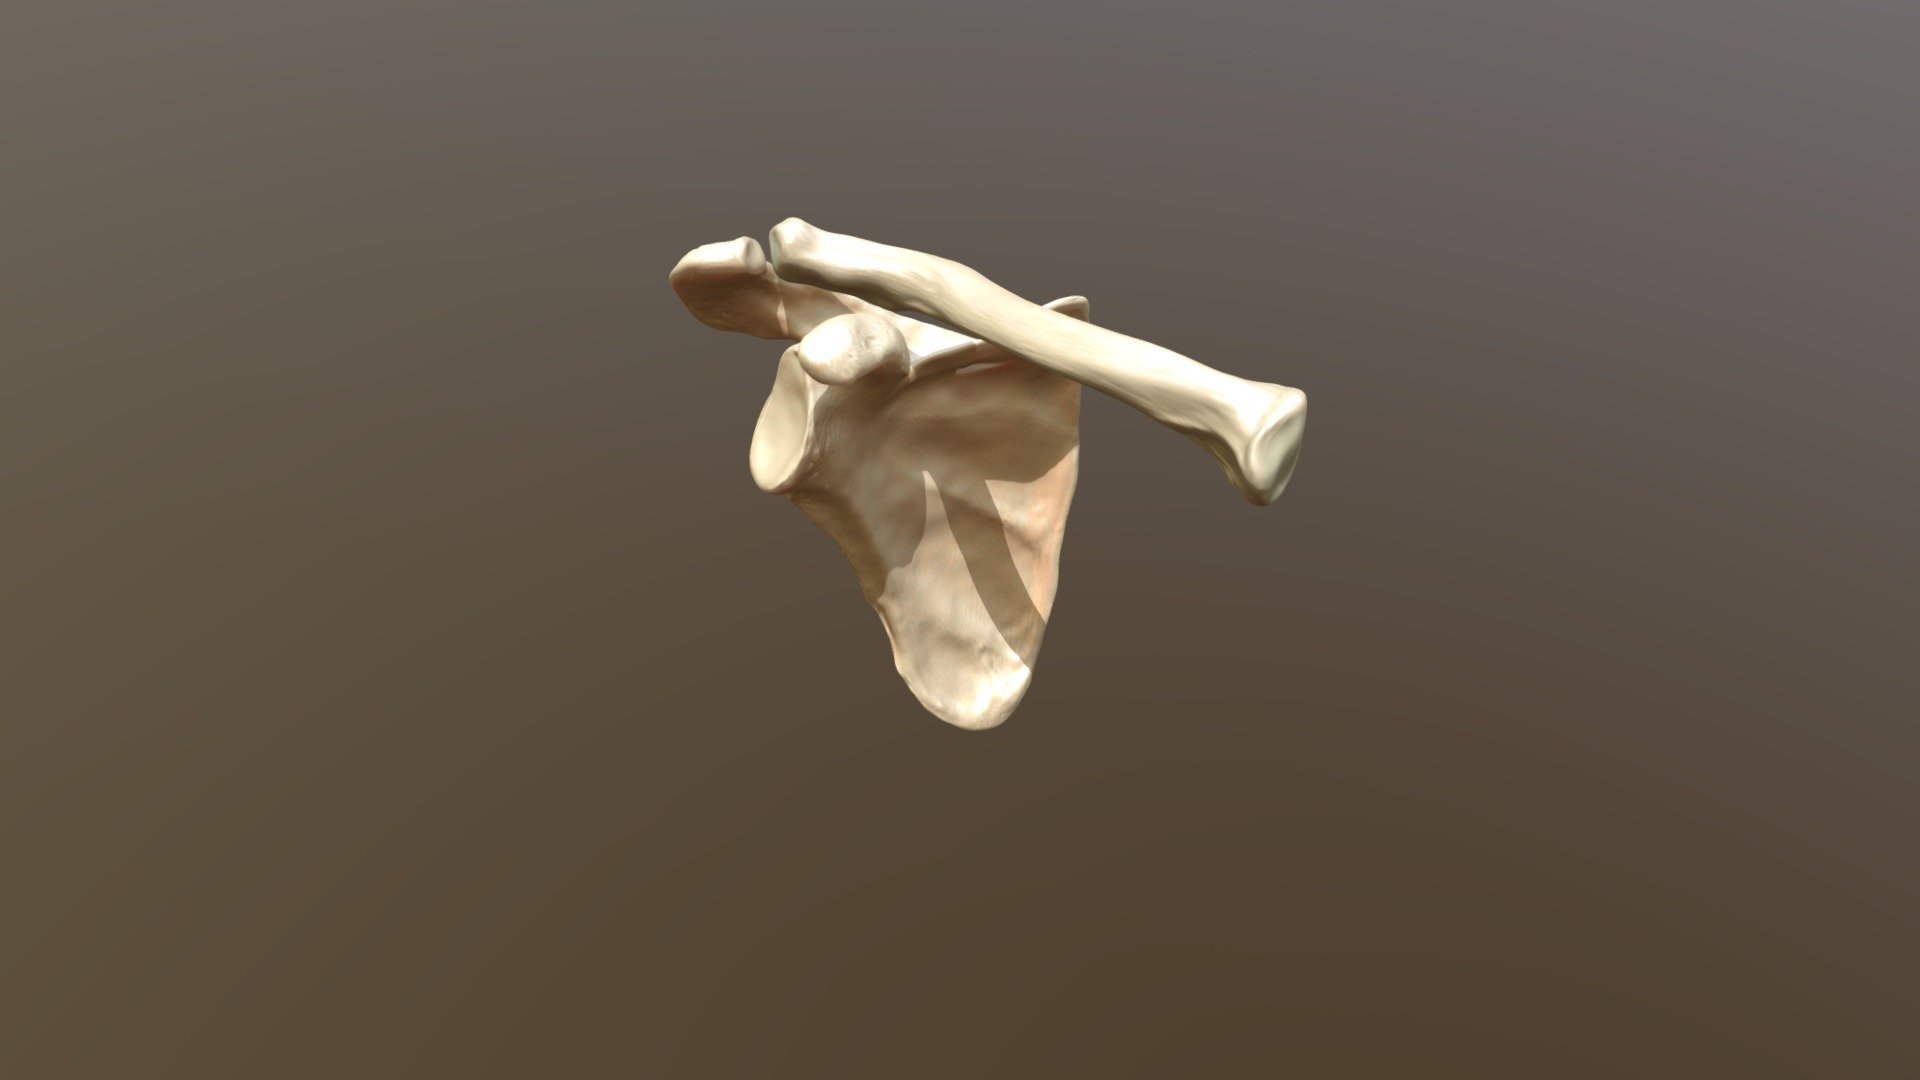 Scapula And Clavicle With Movement